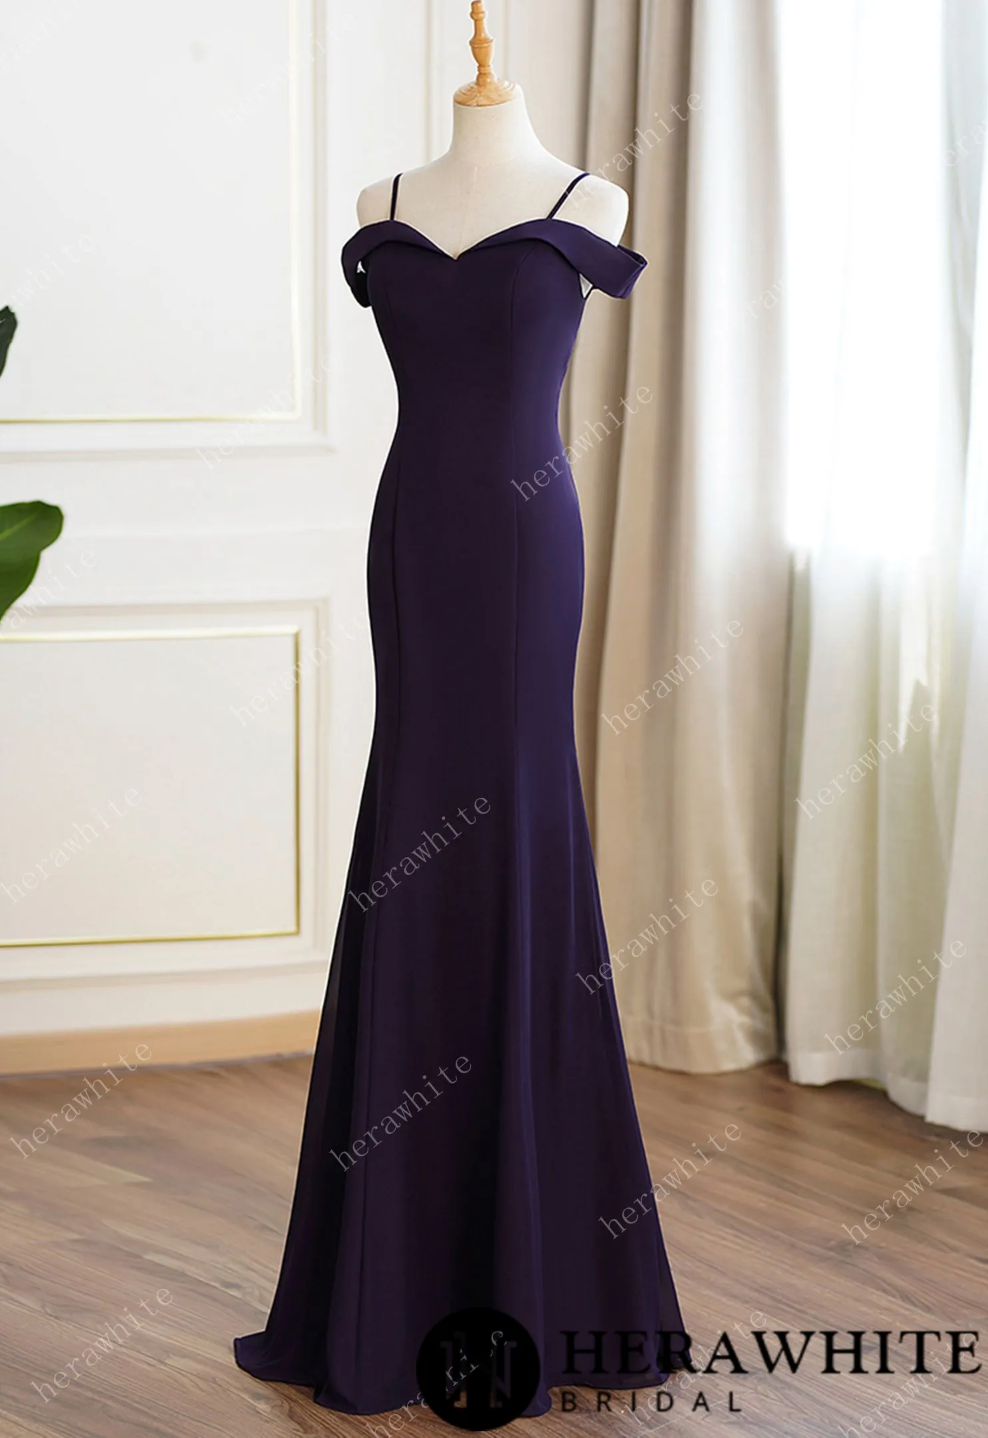 Load image into Gallery viewer, Grape Cold Shoulder Fit and Flare Bridesmaid Dress
